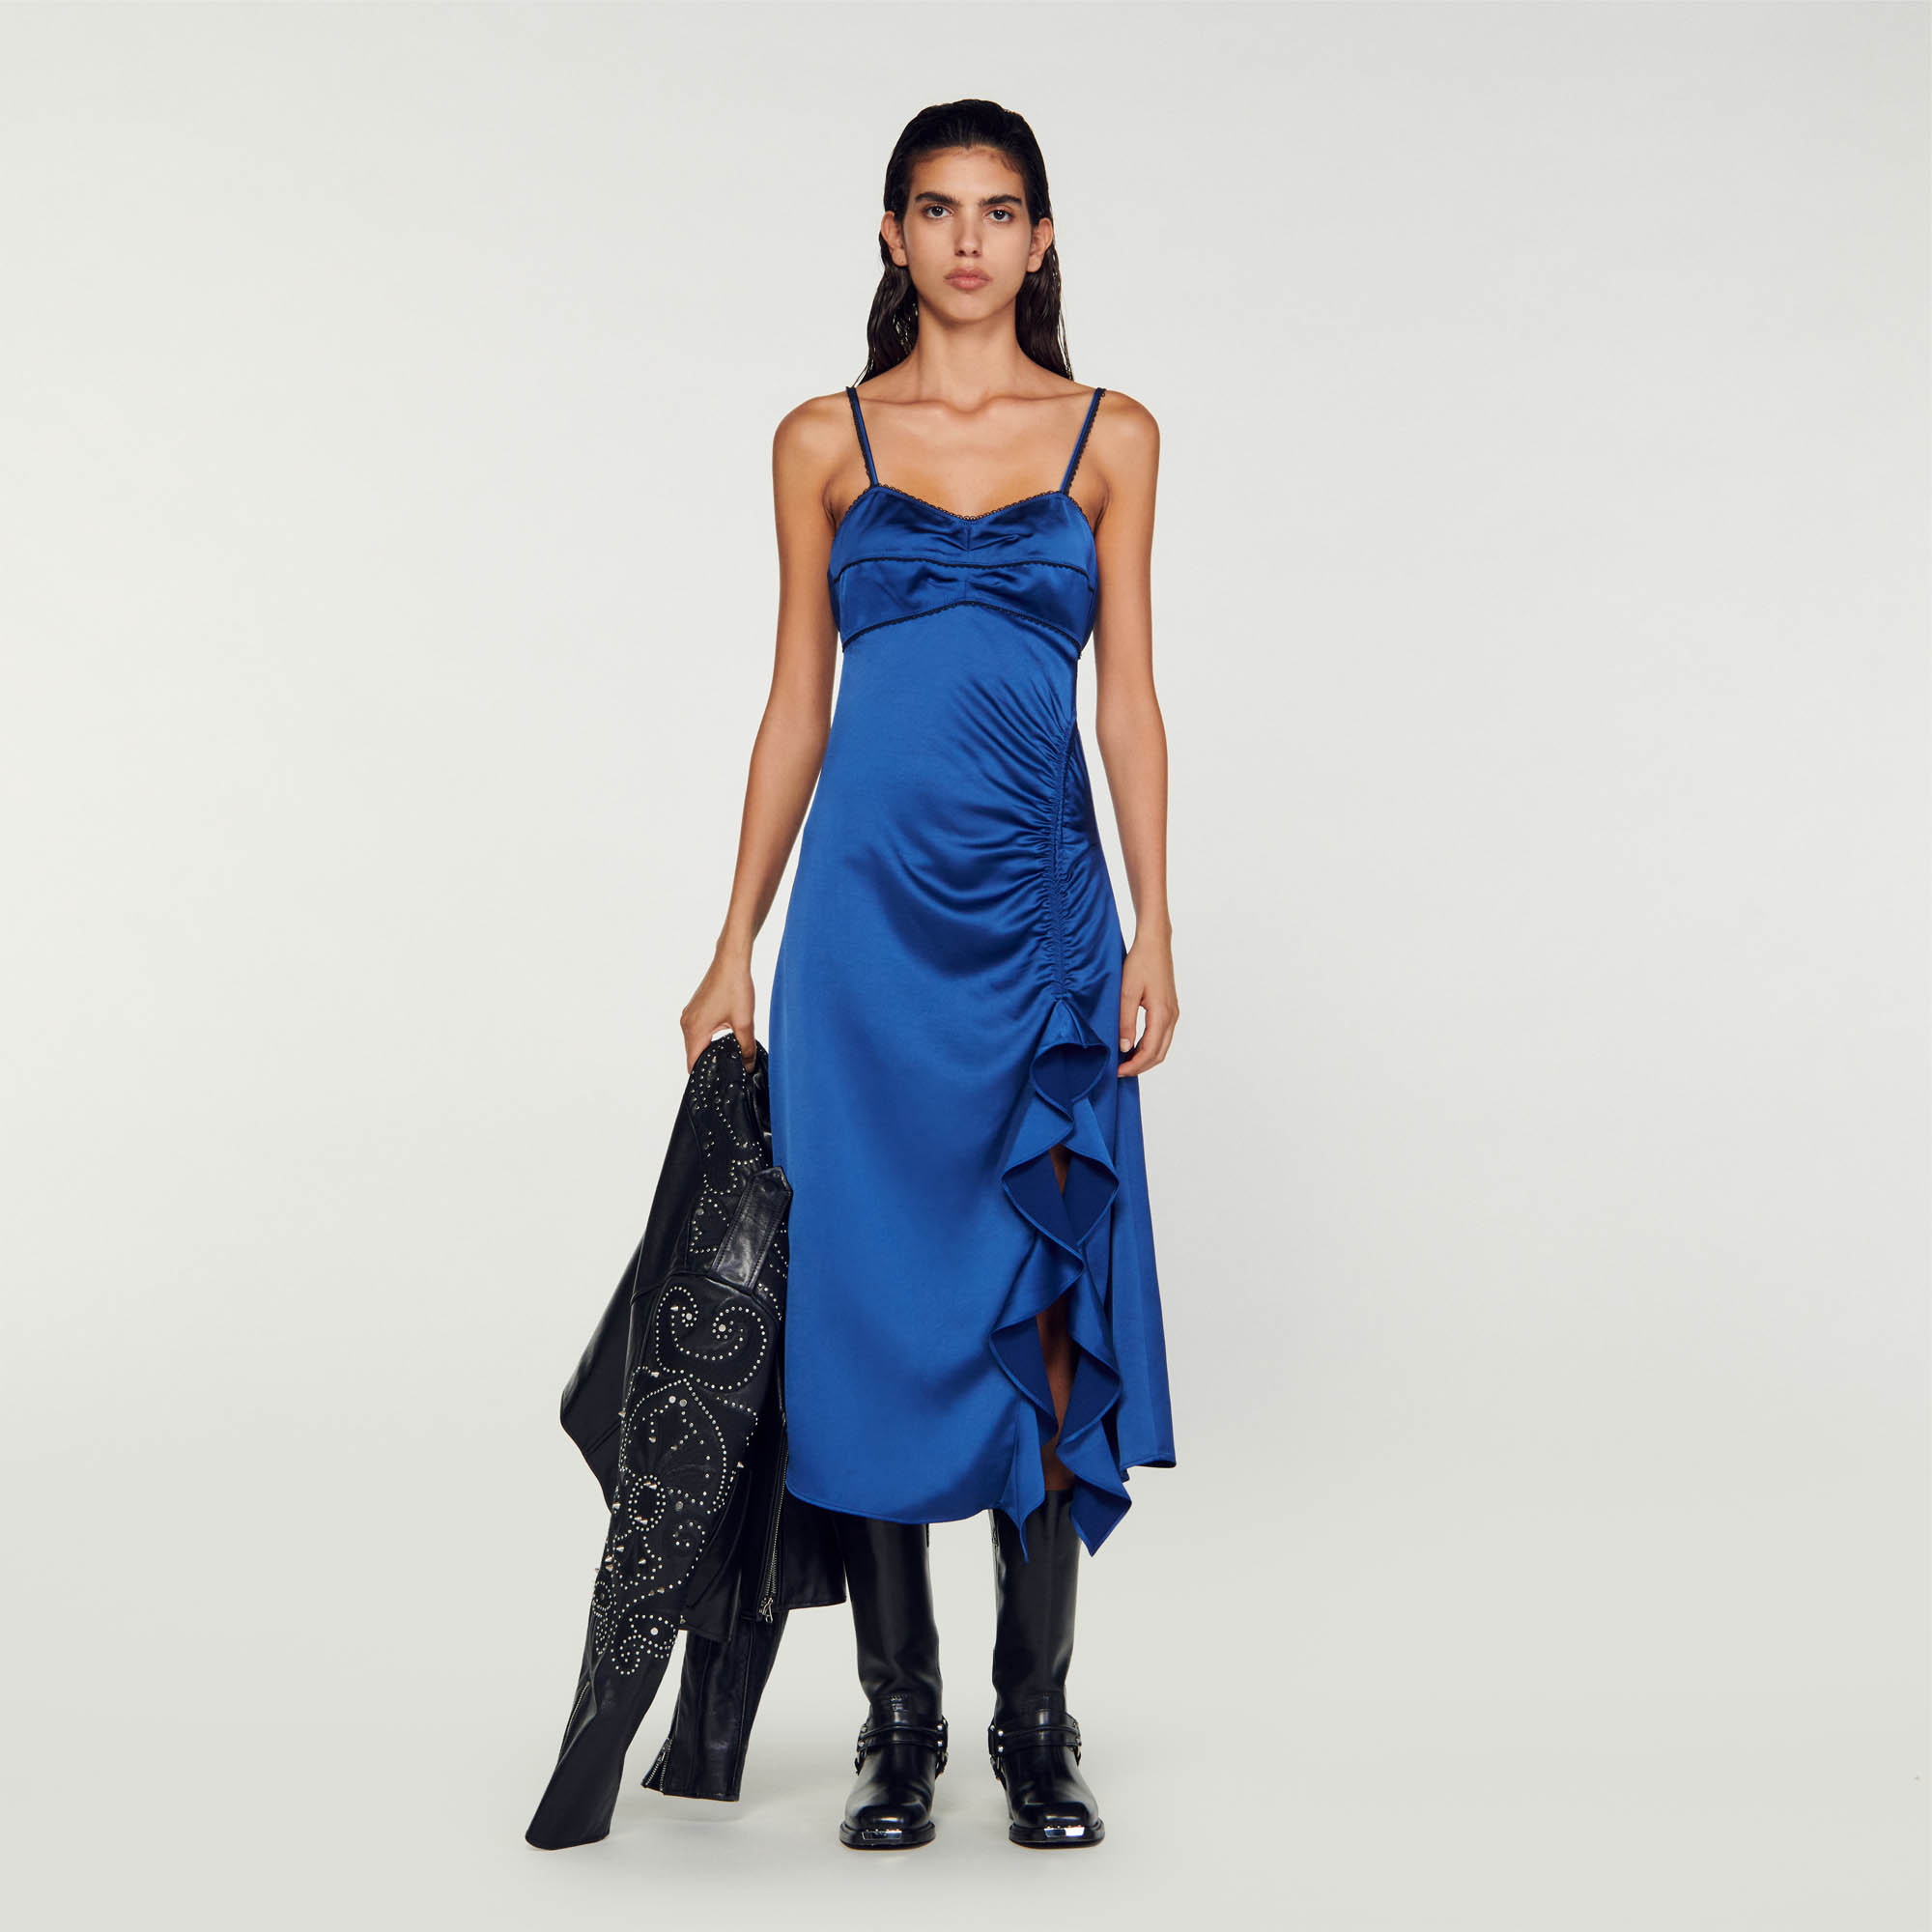 Sandro polyester Lining: Floaty, satin-effect dress with lingerie-style spaghetti straps, featuring a corset-style neckline, hook-and-eye fastenings at the back, and an asymmetrical skirt gathered and ruffled at the front with drawstrings